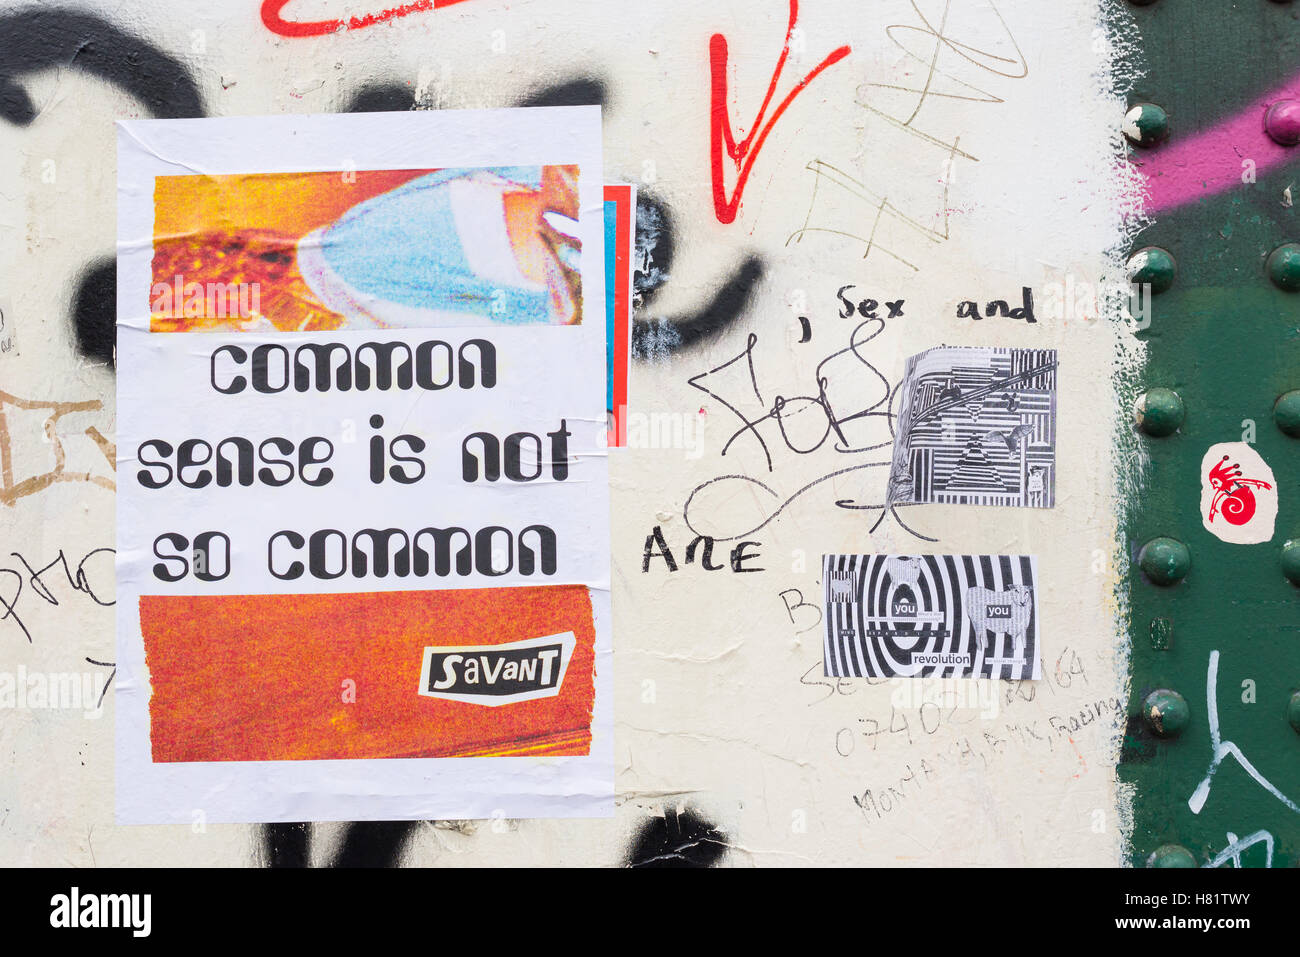 Street art poster attached to a wall with quote from Voltaire 'Common sense is not so common' on it from street artist Savant. Stock Photo